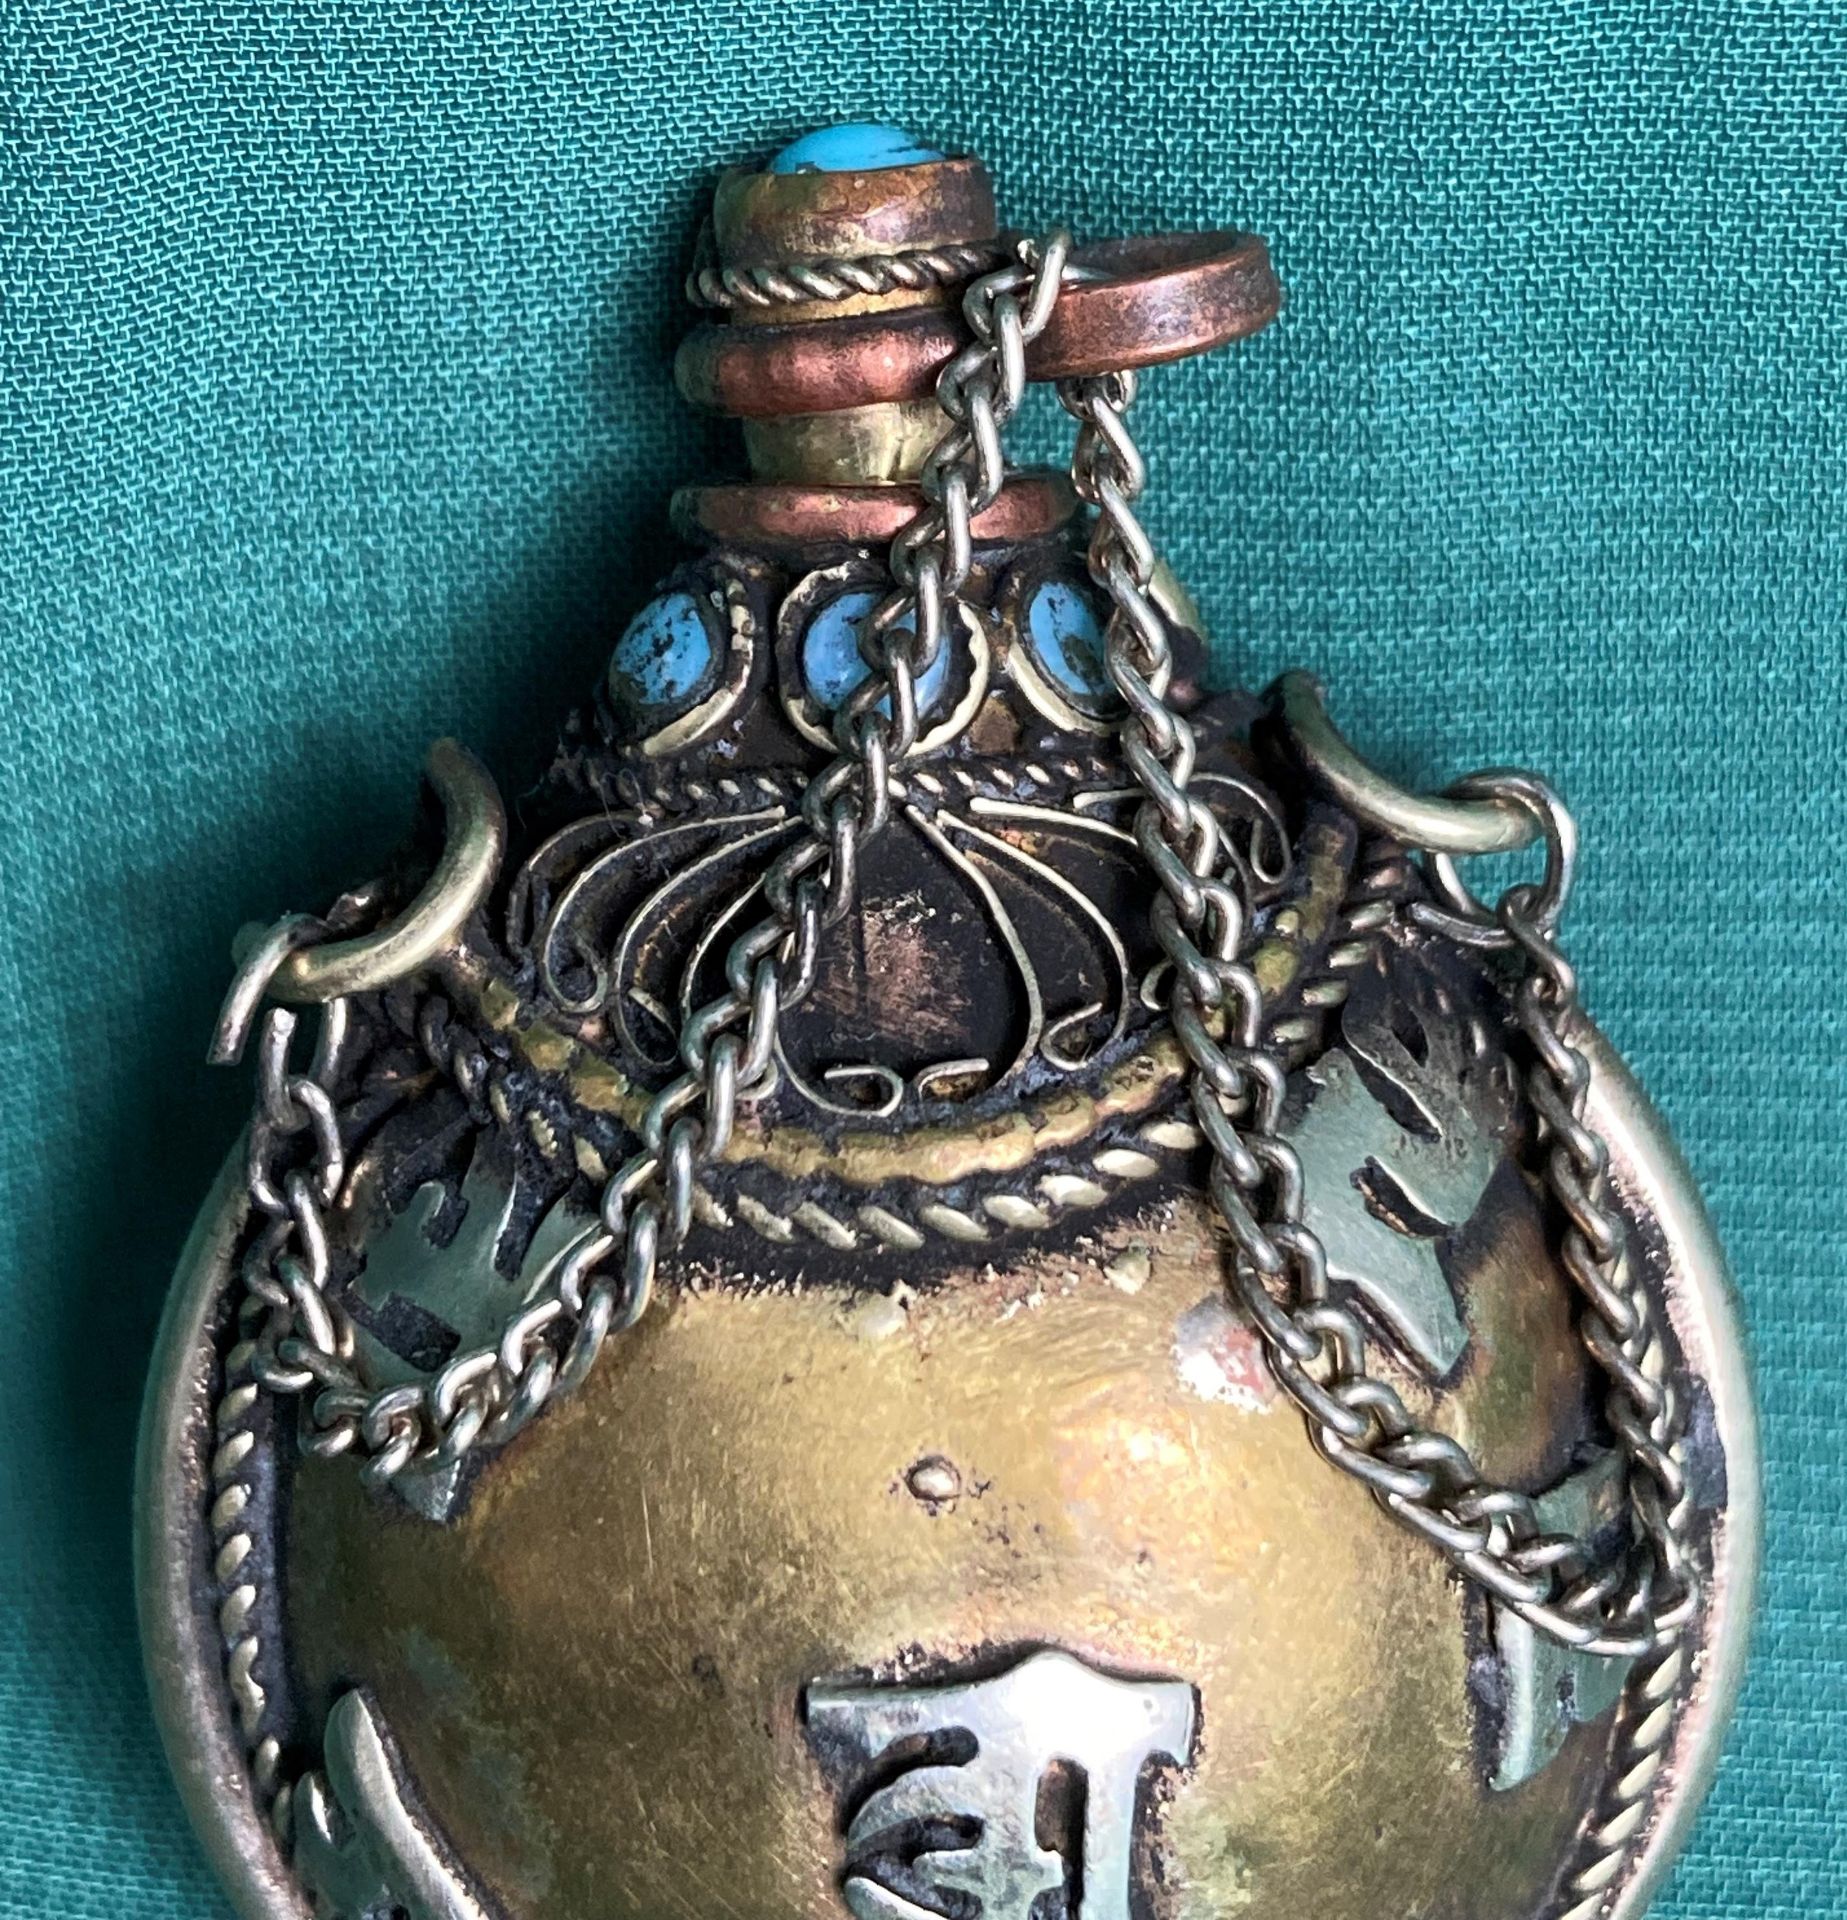 An antique Chinese/Tibetan hand-made metal snuff/opium bottle with light blue stones, - Image 4 of 4